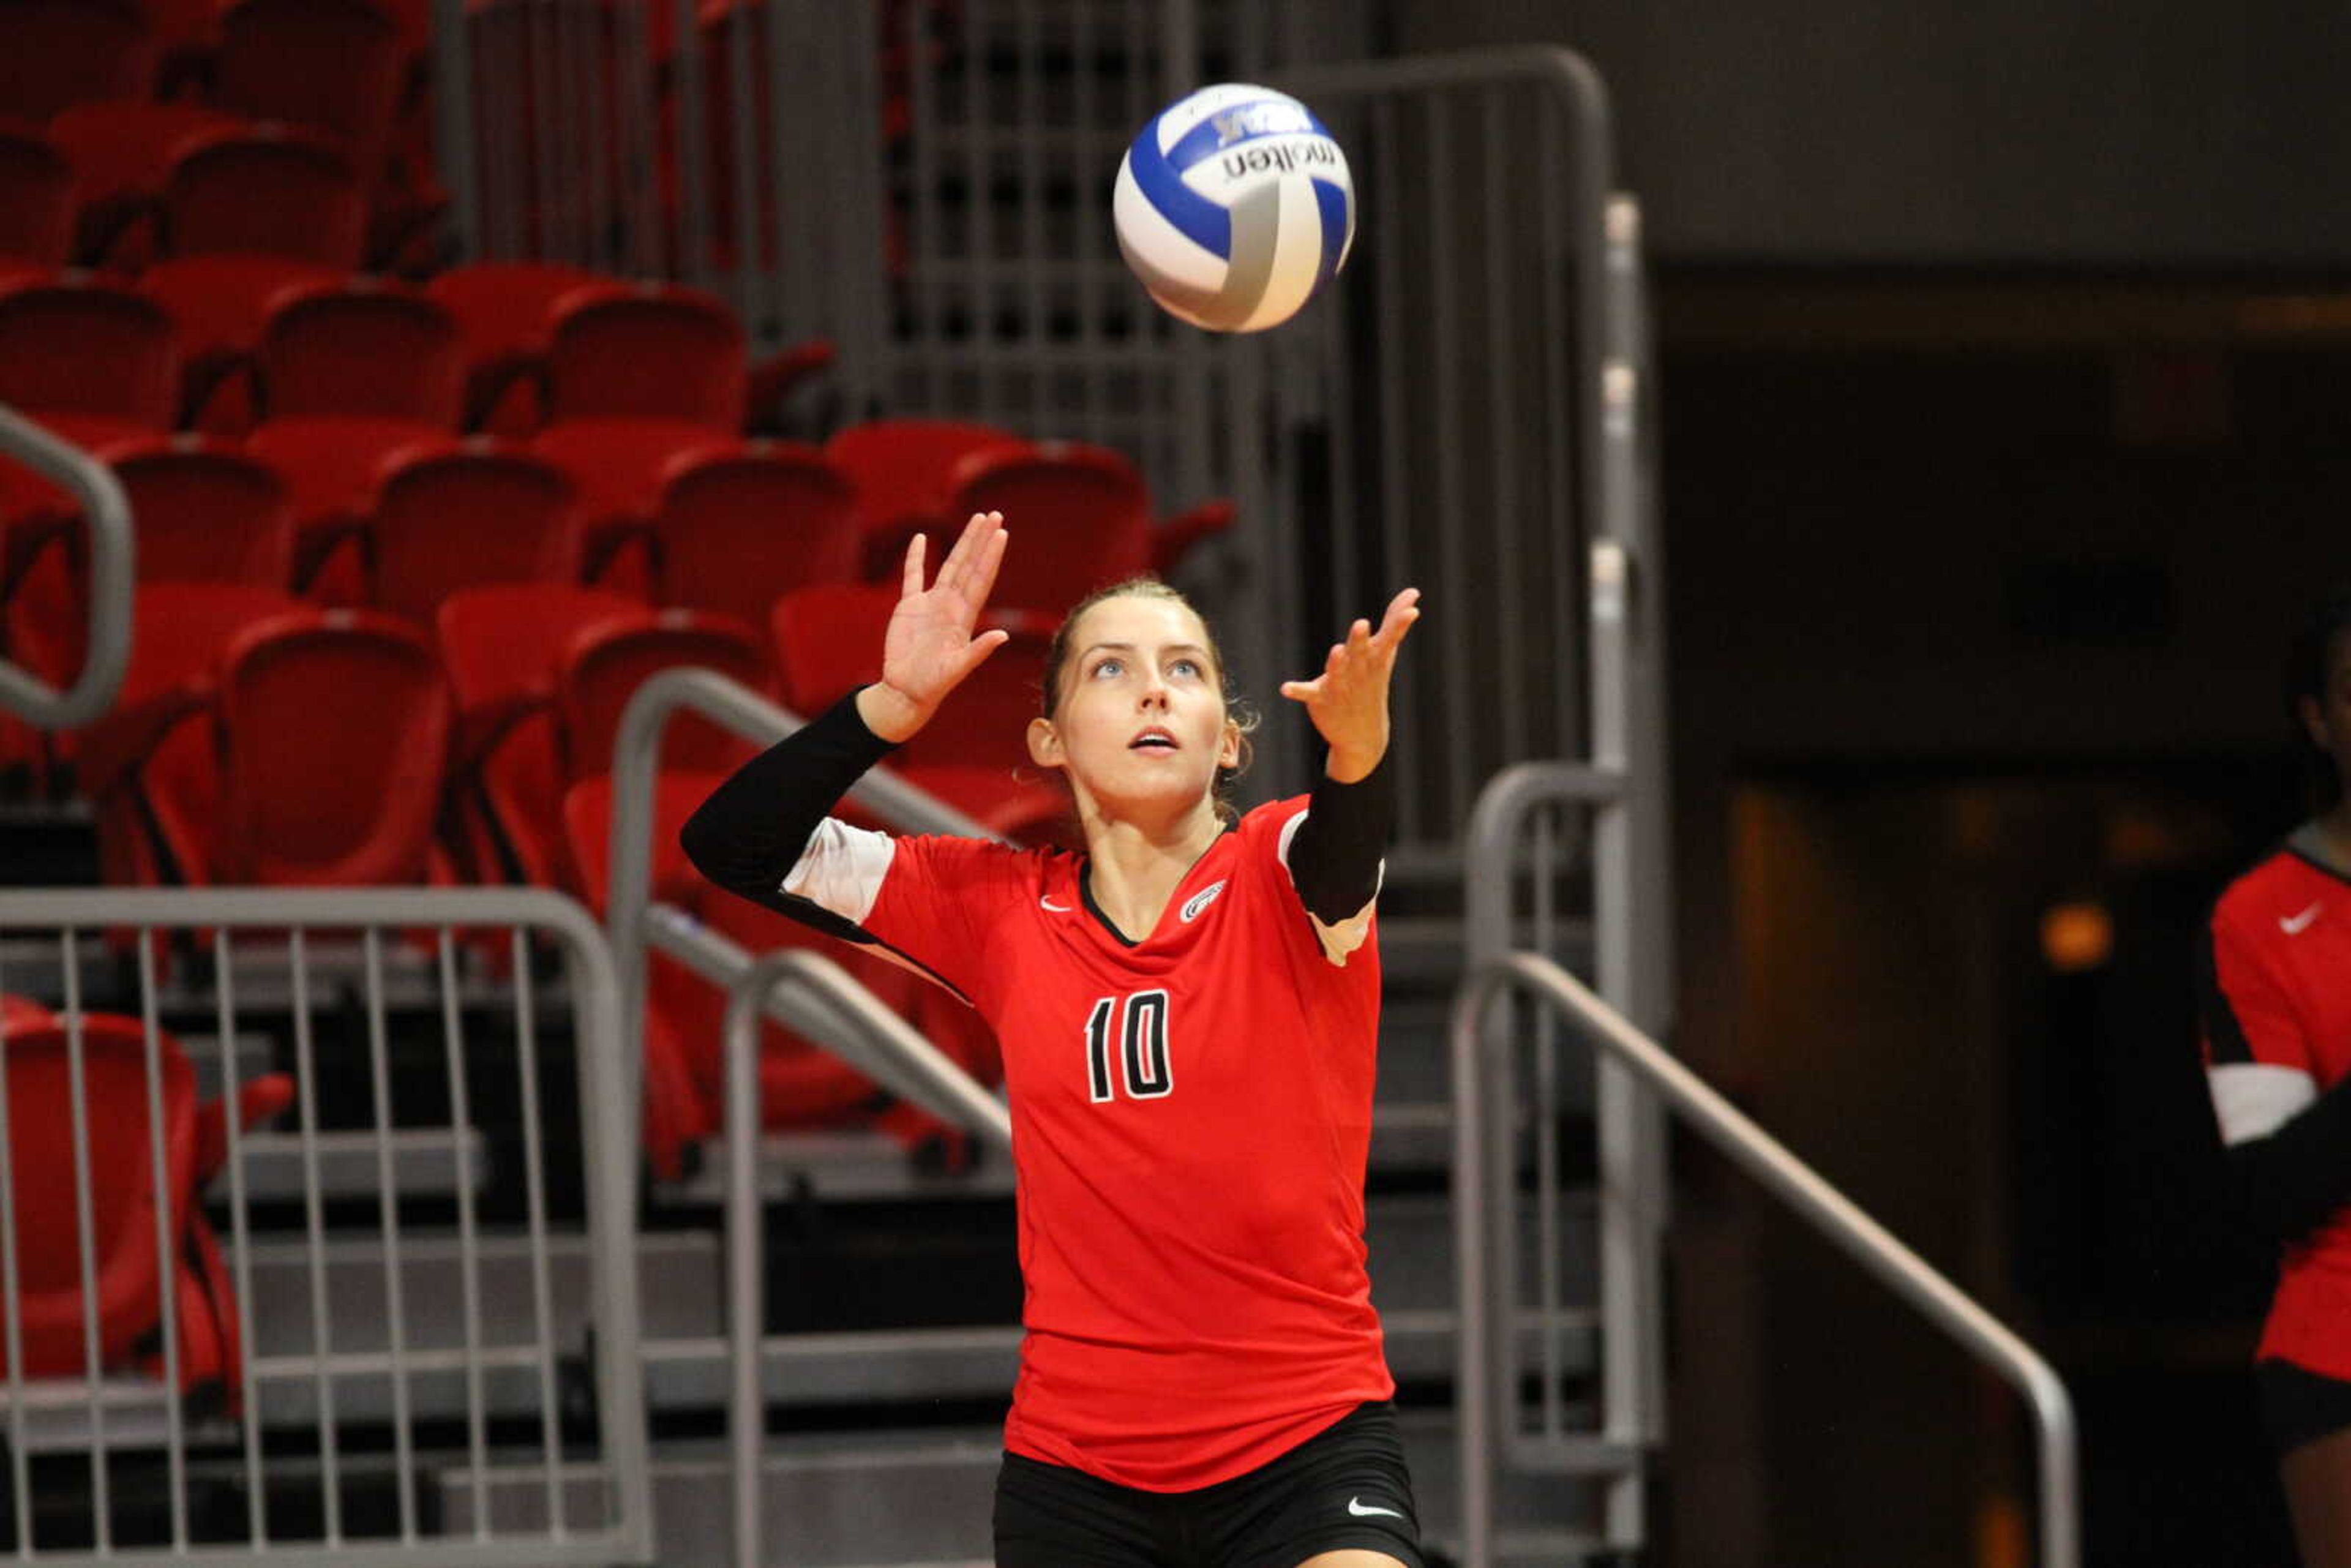 Volleyball wraps Senior Weekend with two victories at home